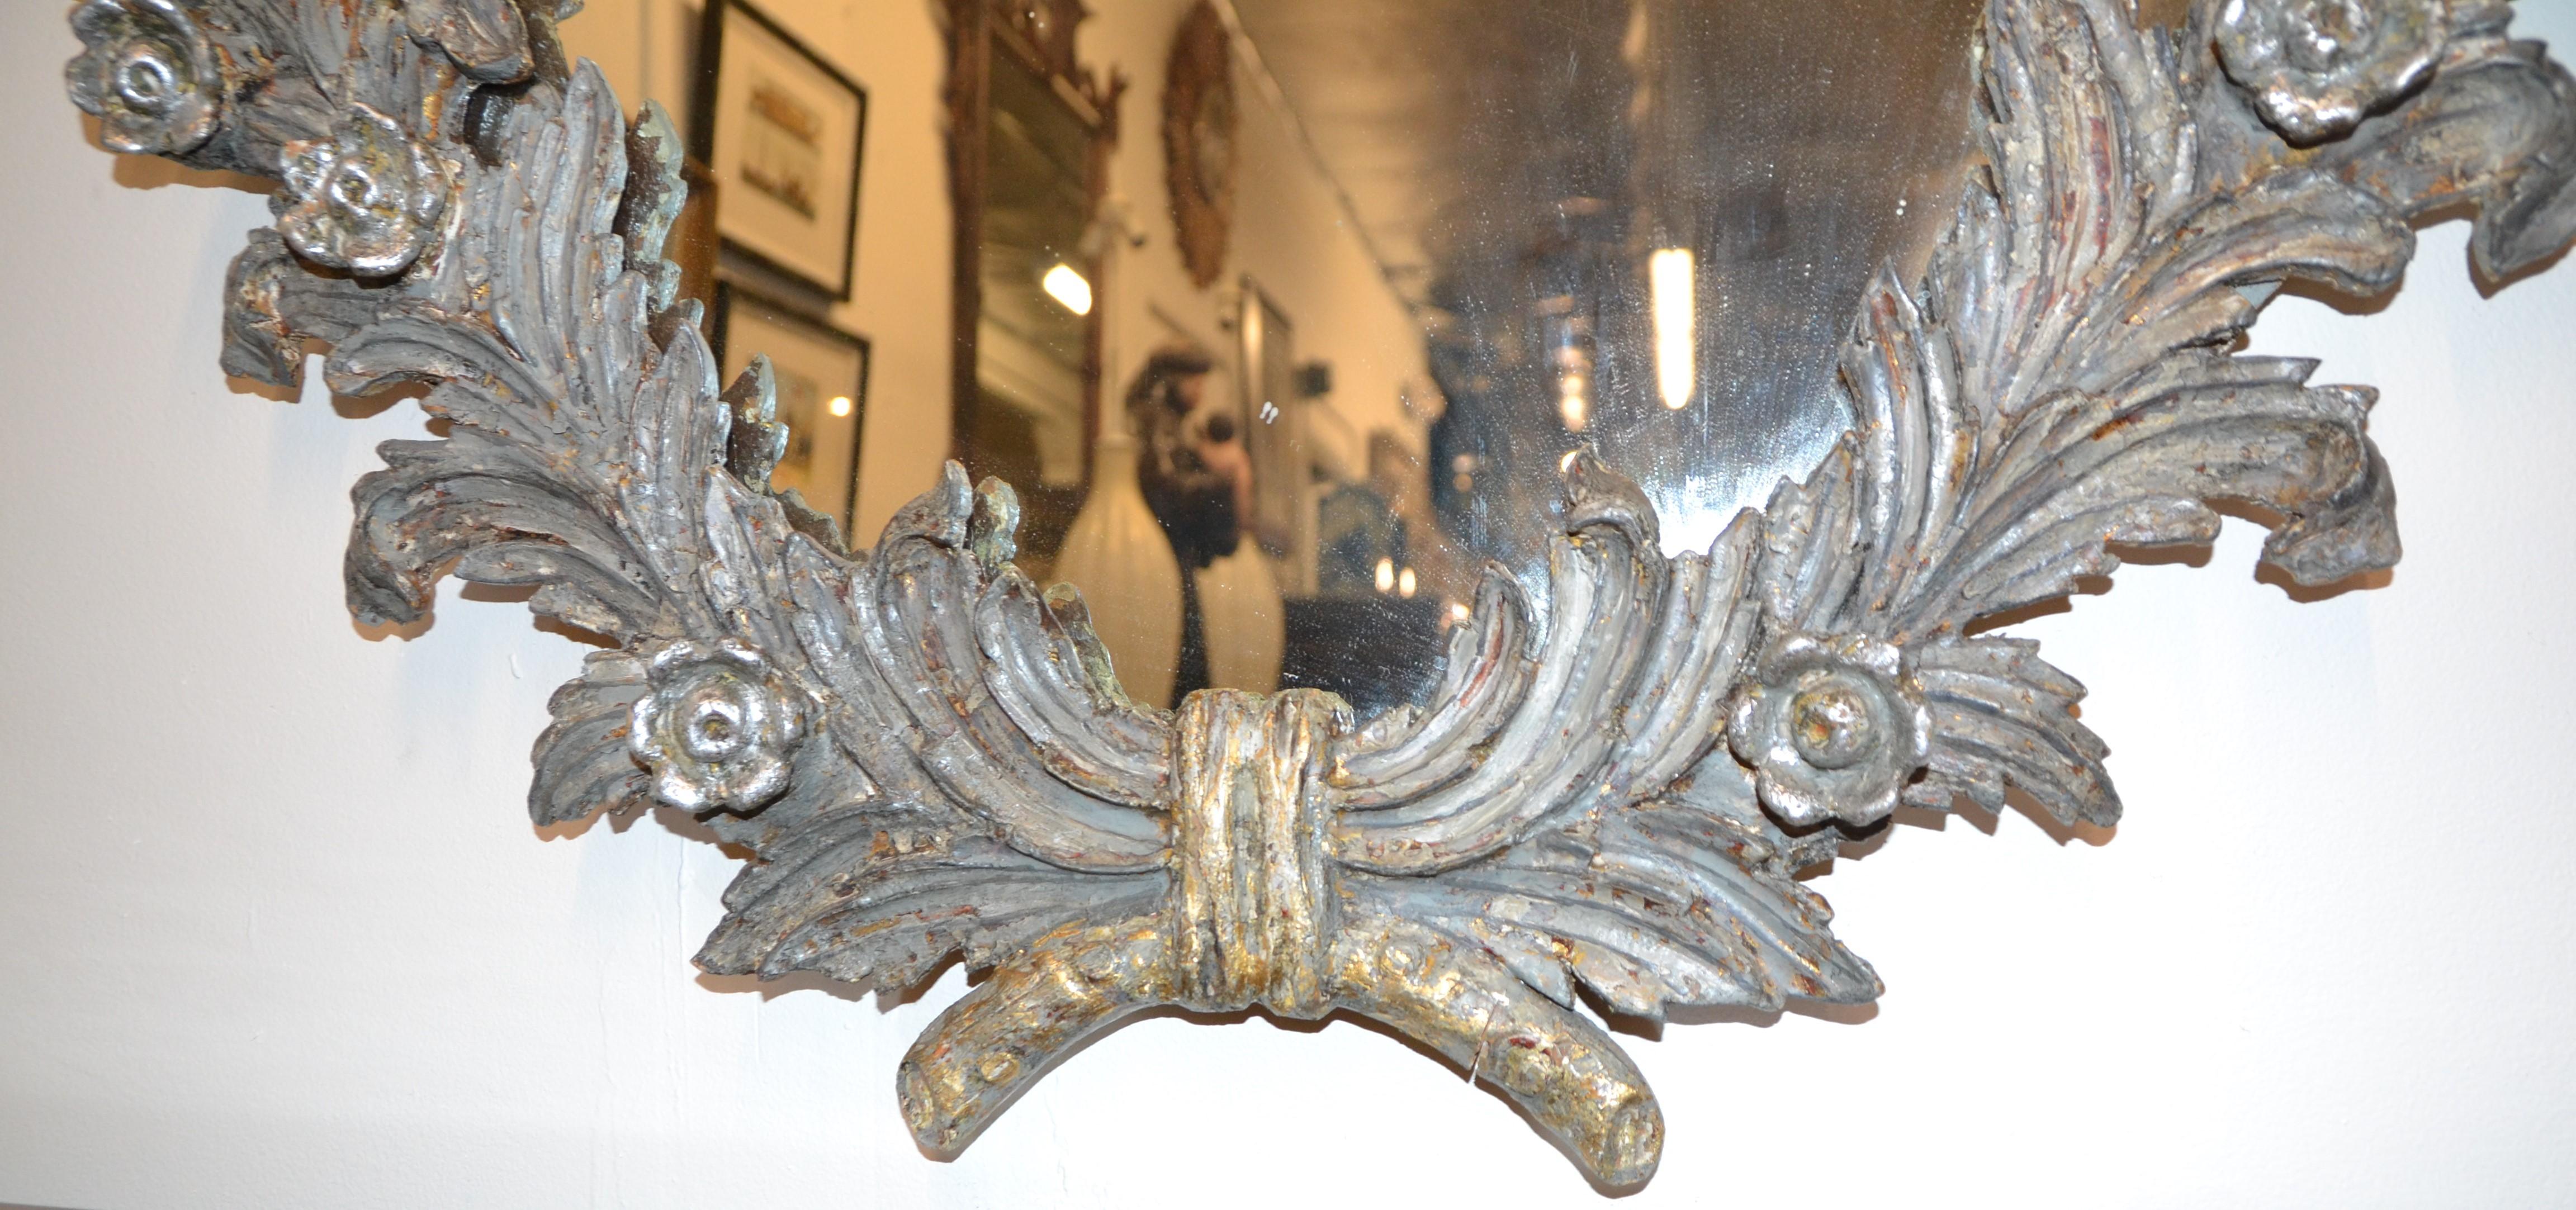 Mirror with wood carved leaves and flowers. Gray and silver finish.